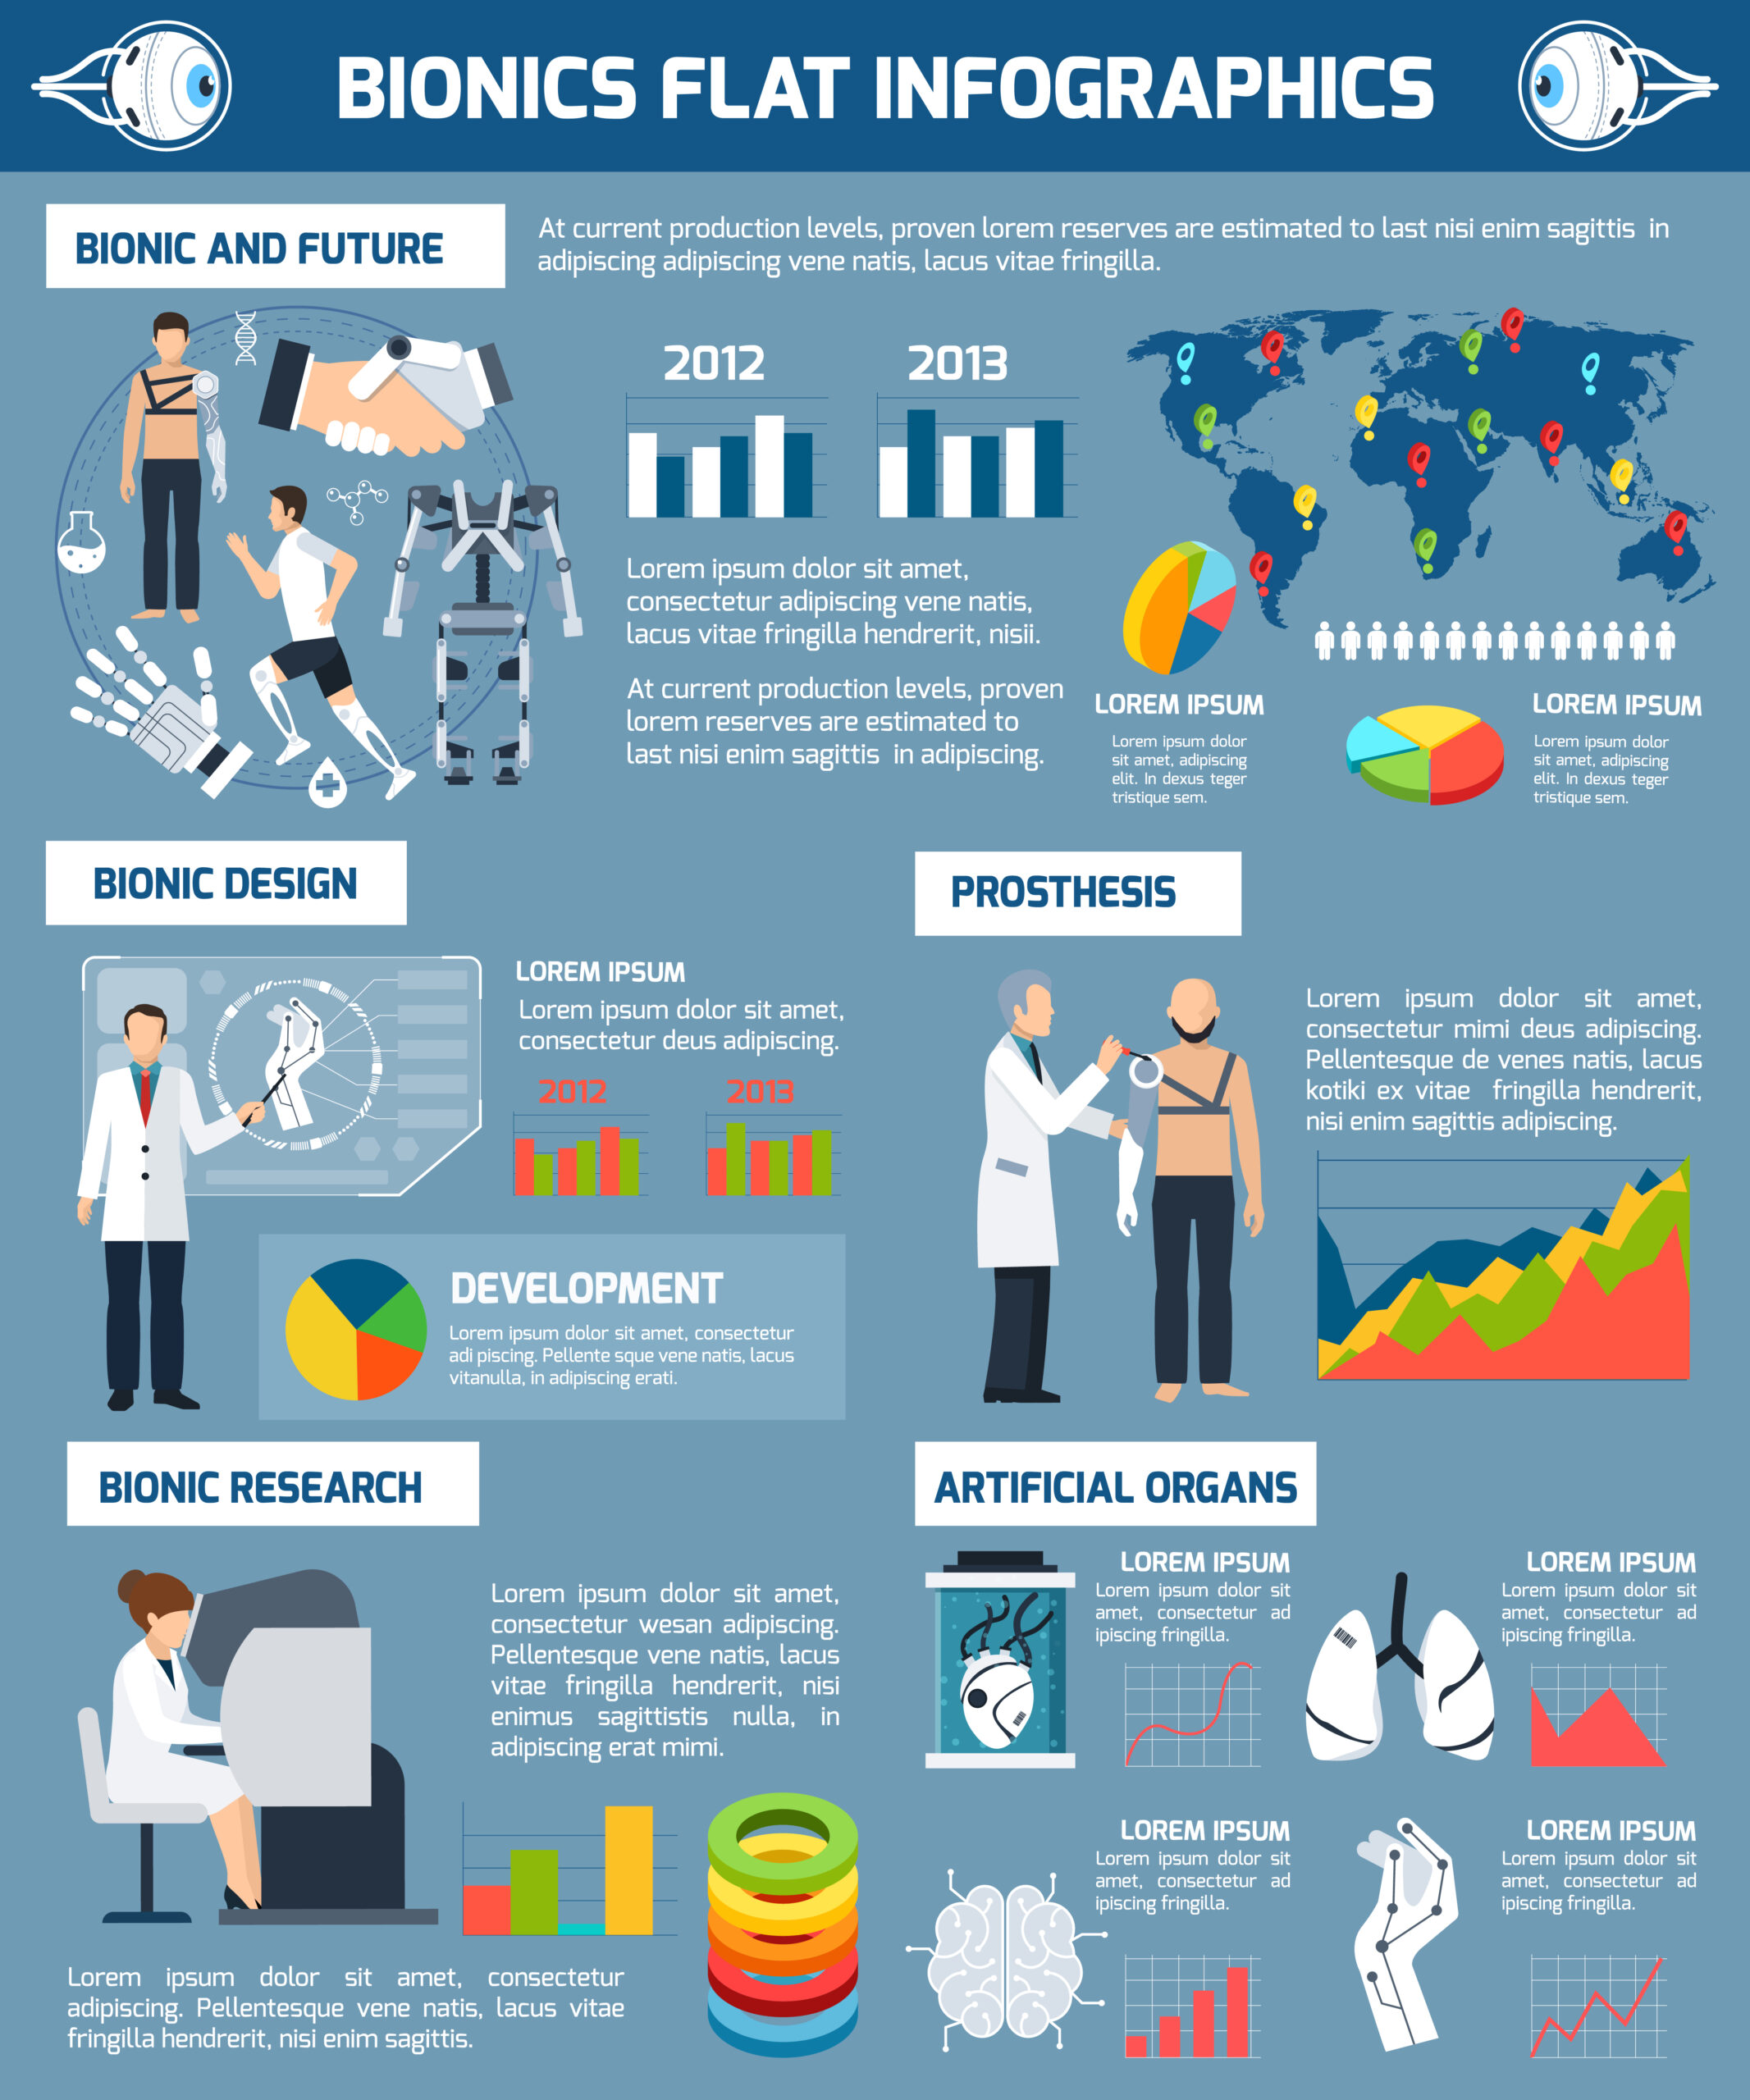 Why Infographics are Effective for Content Marketing